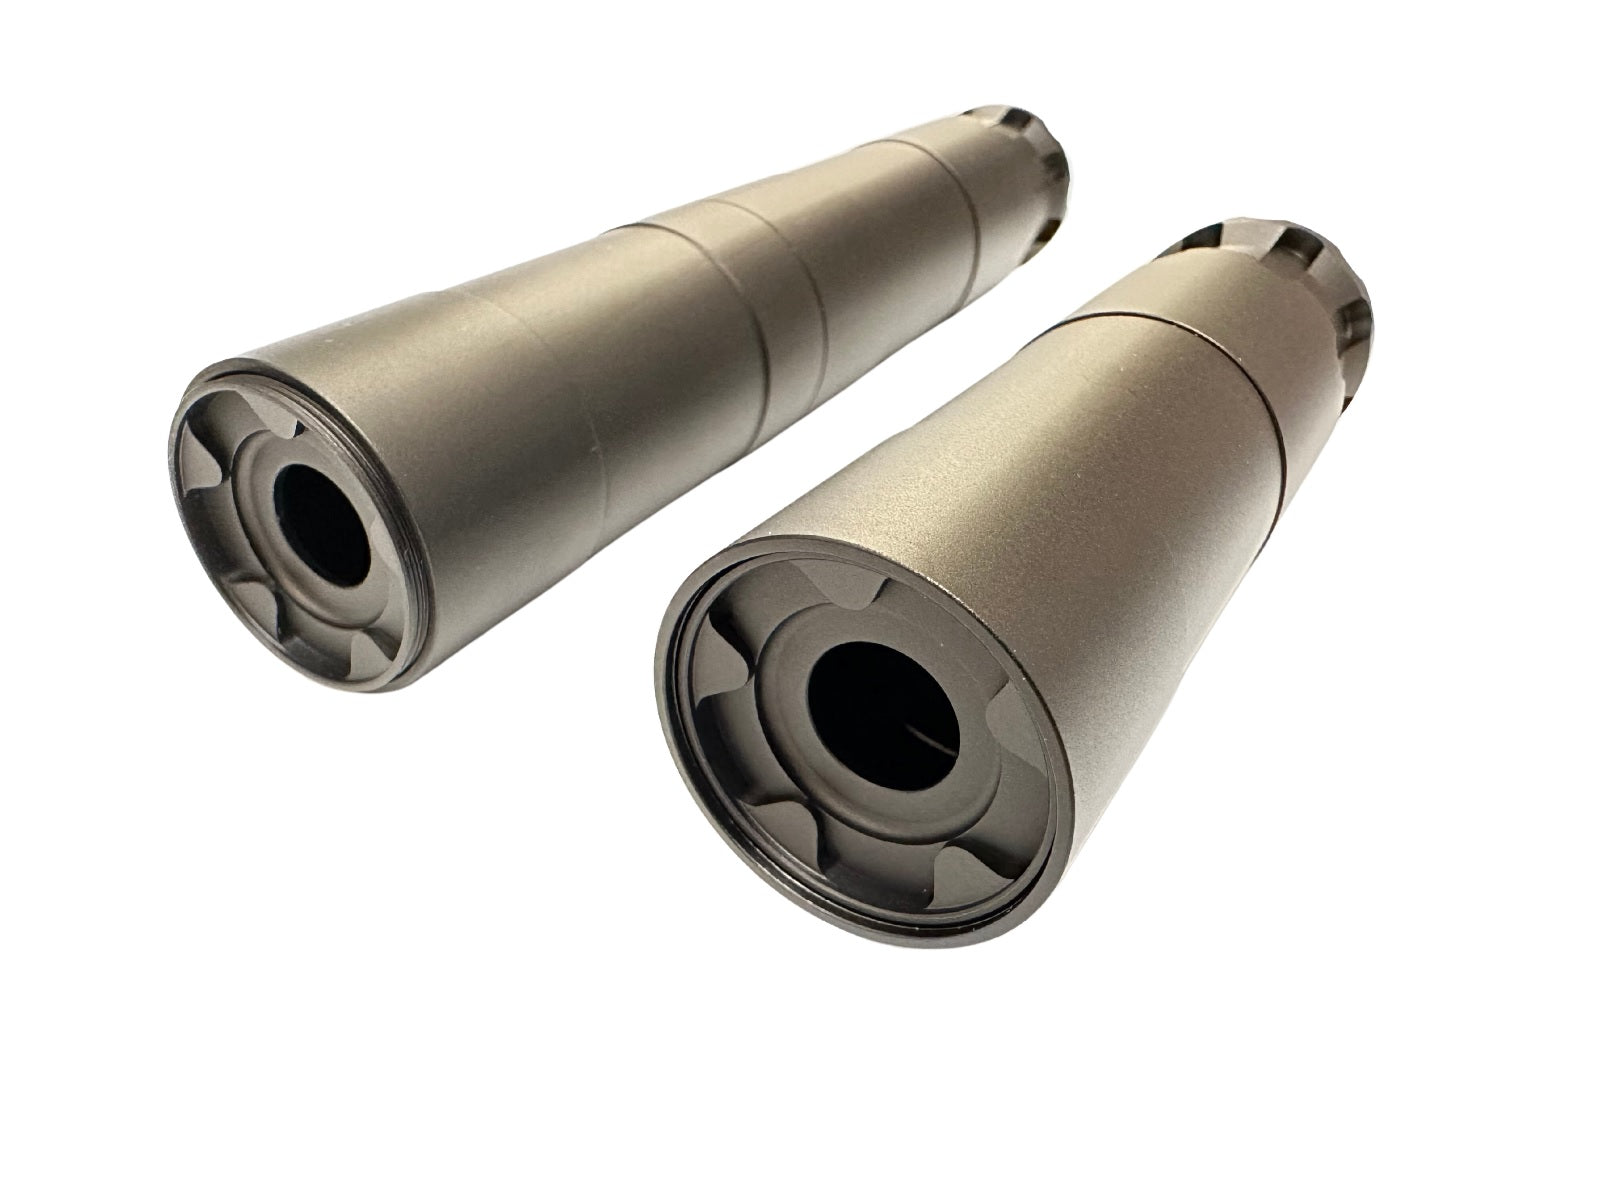 Pro-Arms RUG Style Dummy Silencer 14mm- (156mm / 198mm) (Black)